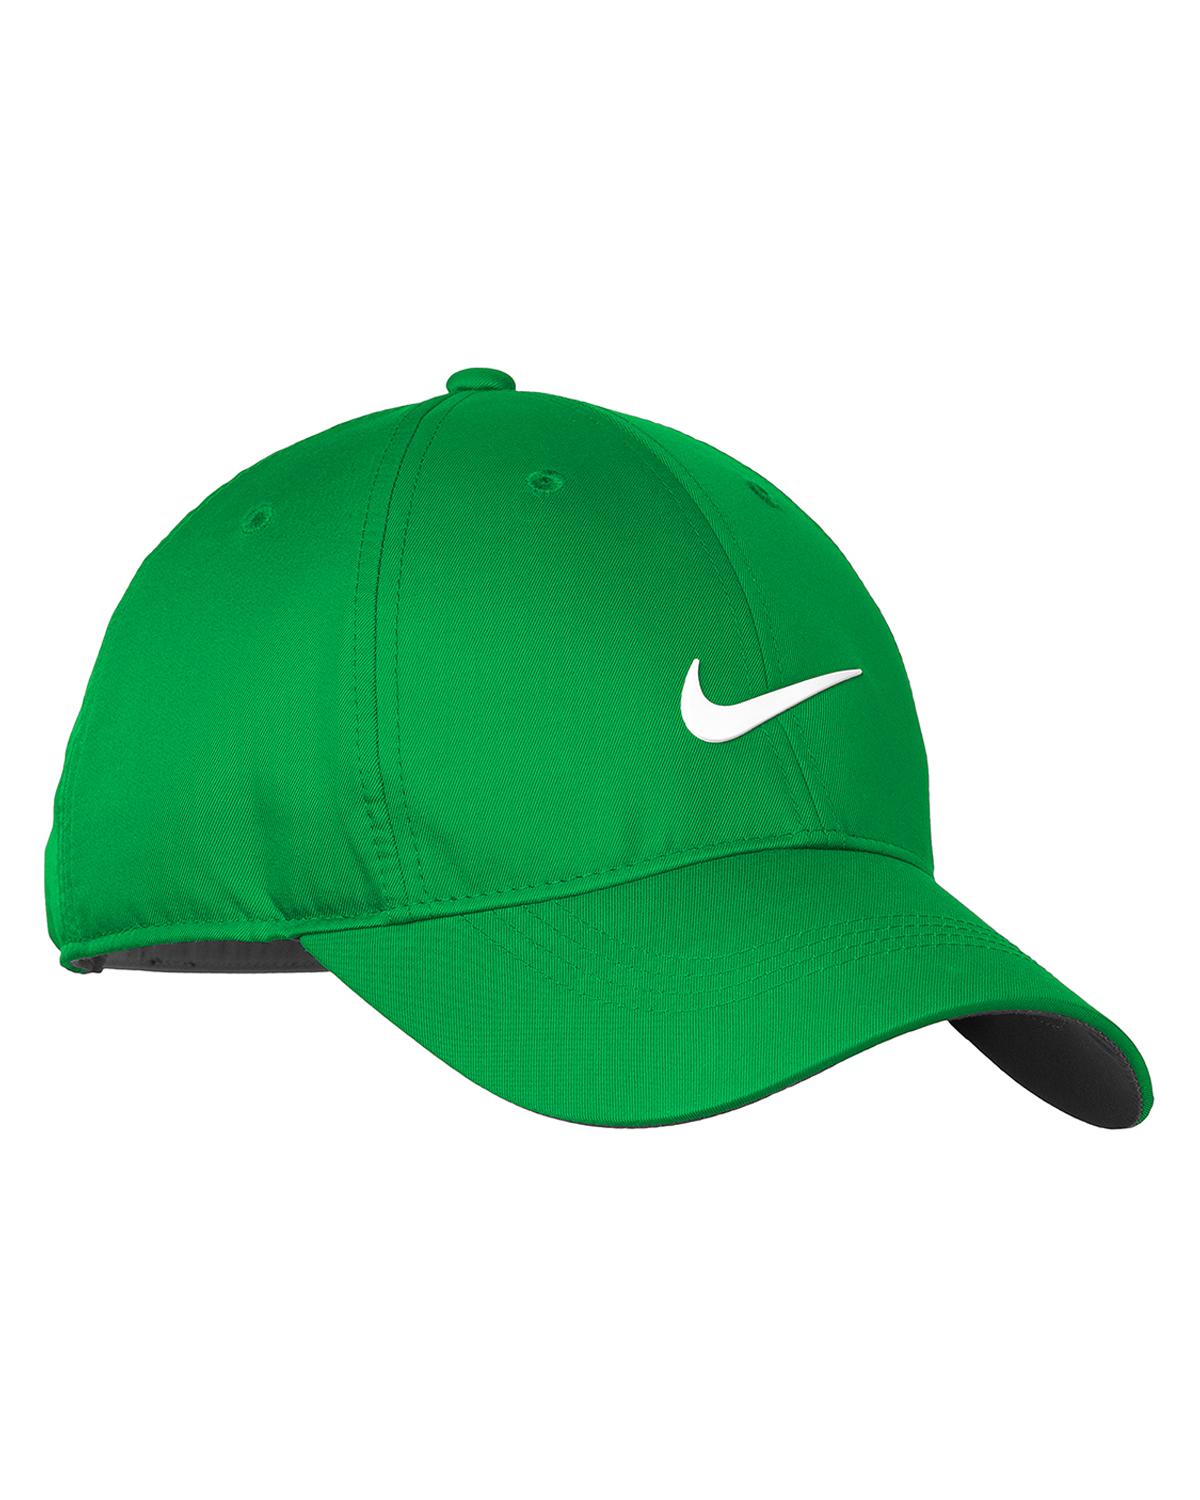 Chart for Nike Golf 548533 Dri-FIT Front - A2ZClothing.com